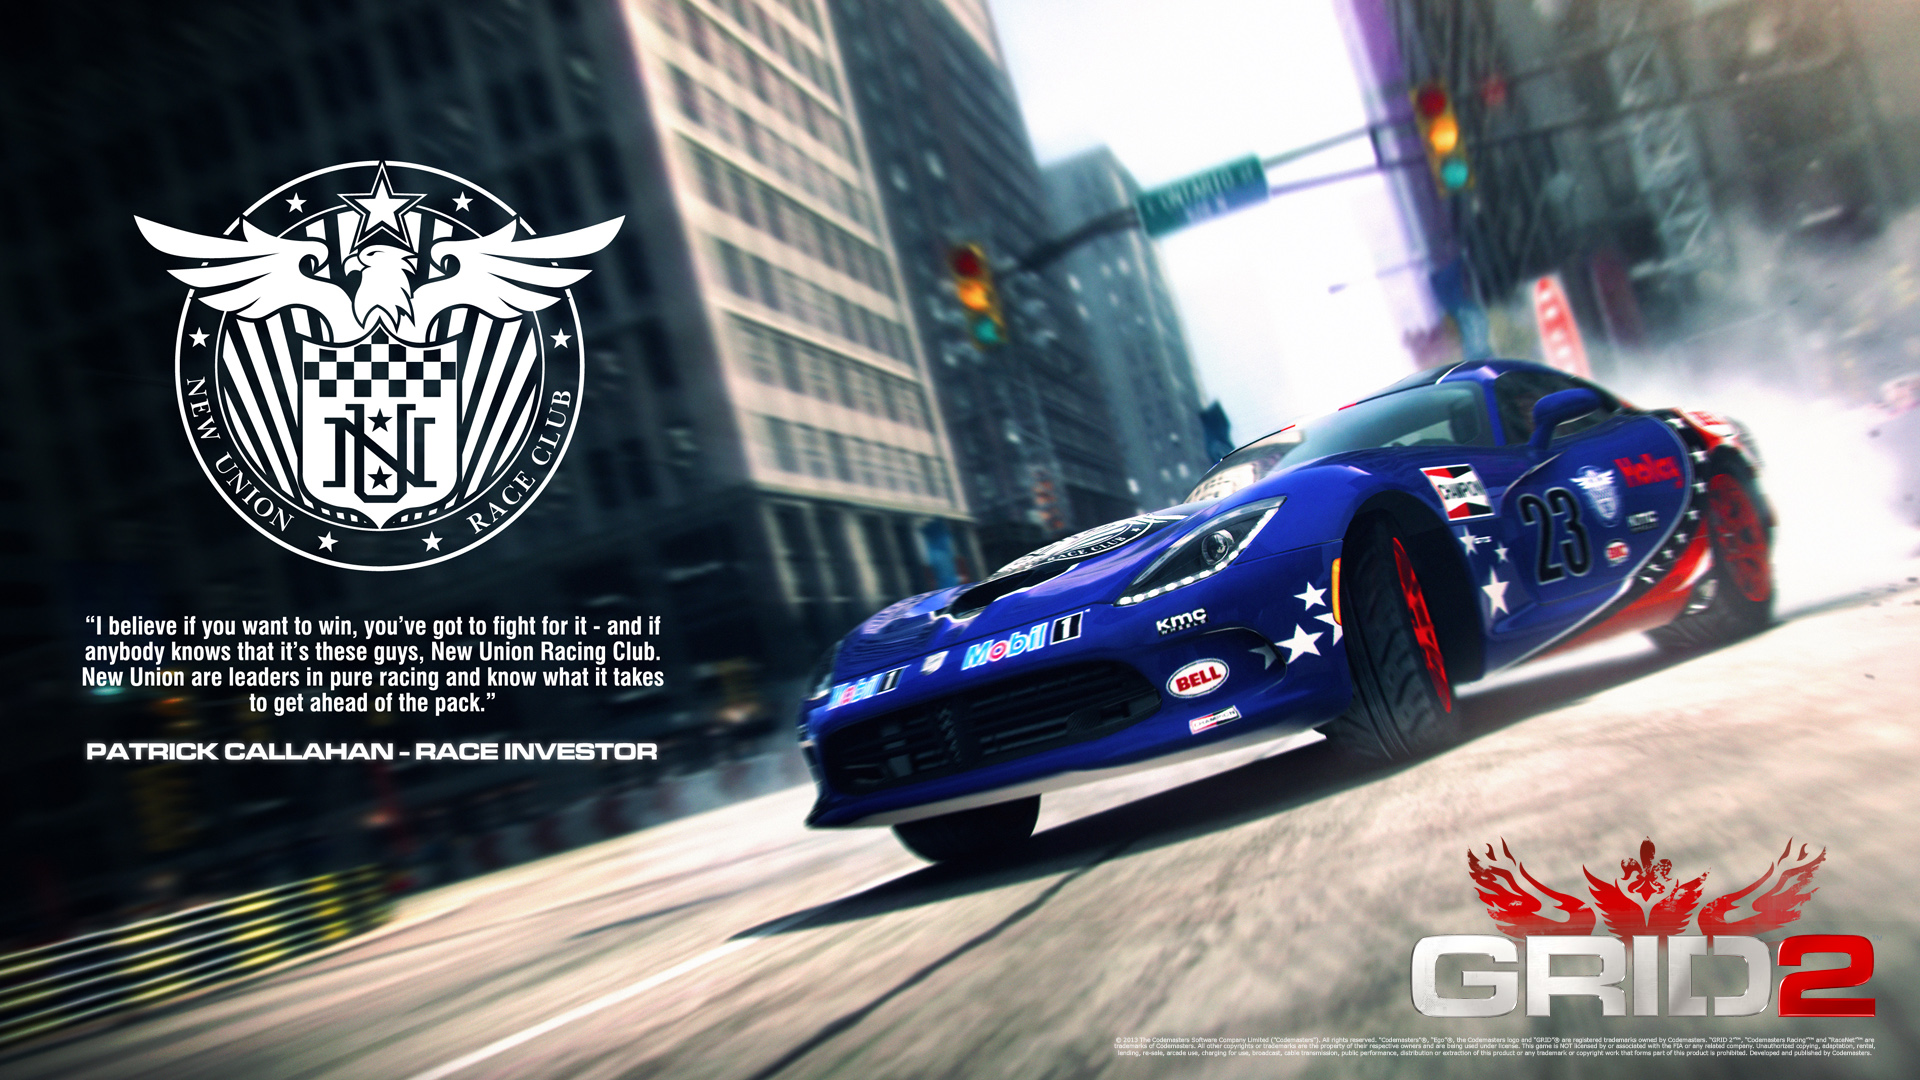 GRID 2 HD Wallpaper Background Image 1920x1080